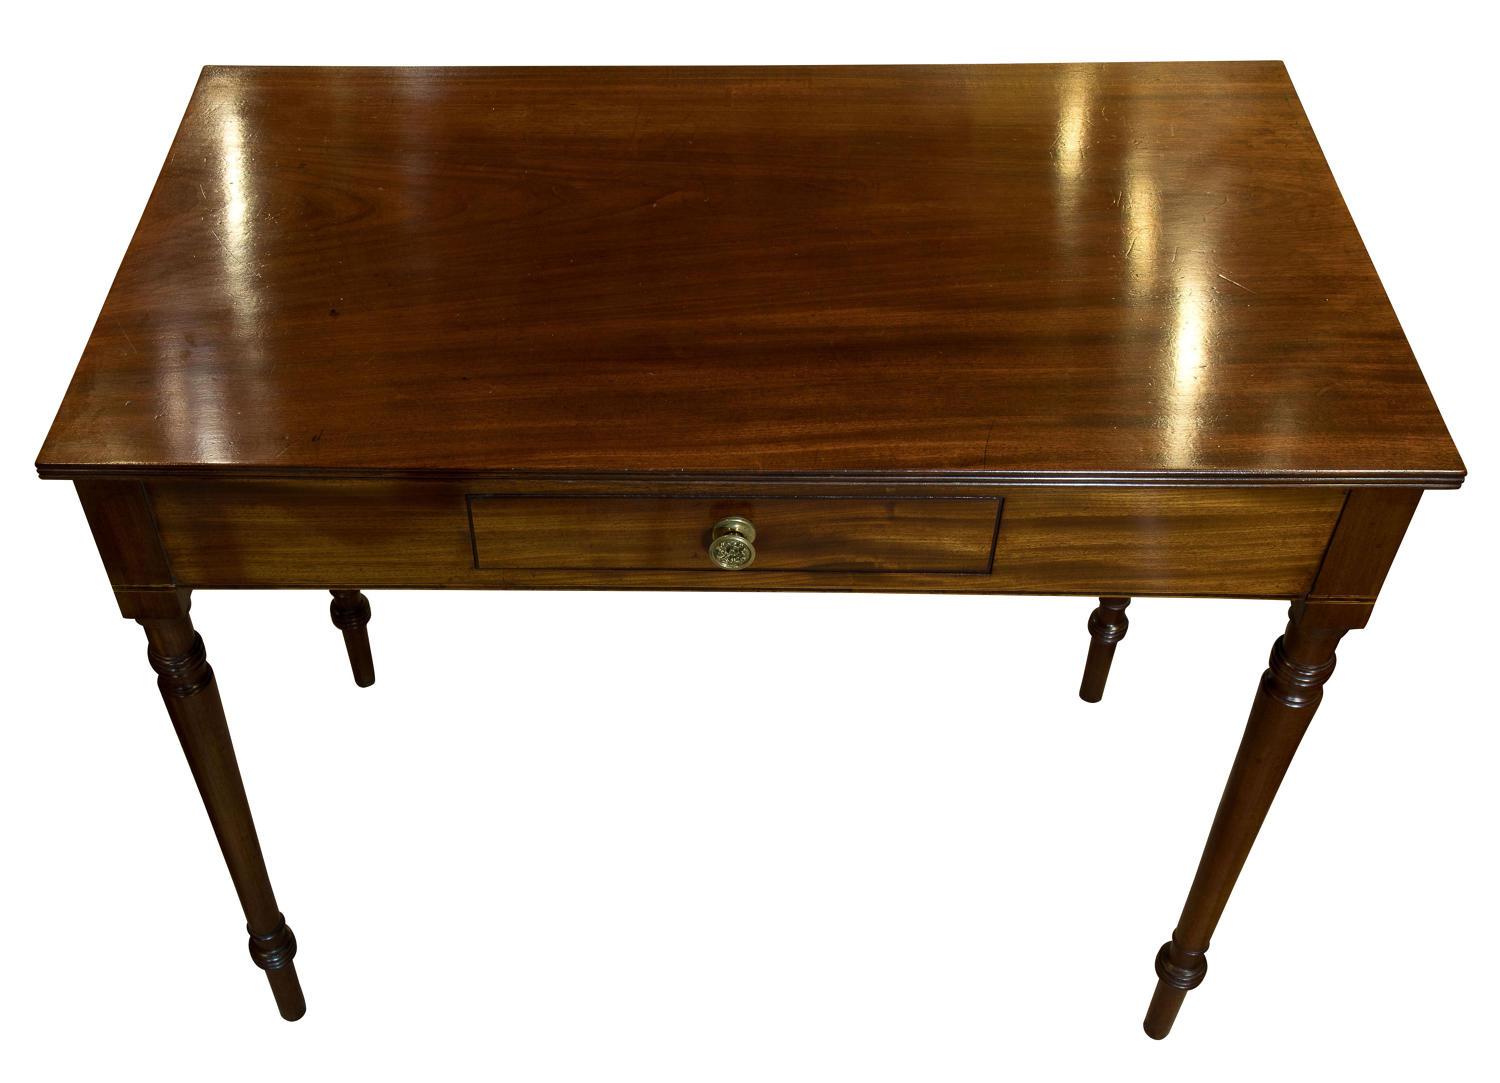 Late Victorian 18th Century Mahogany Side Table with Drawer, circa 1790 For Sale